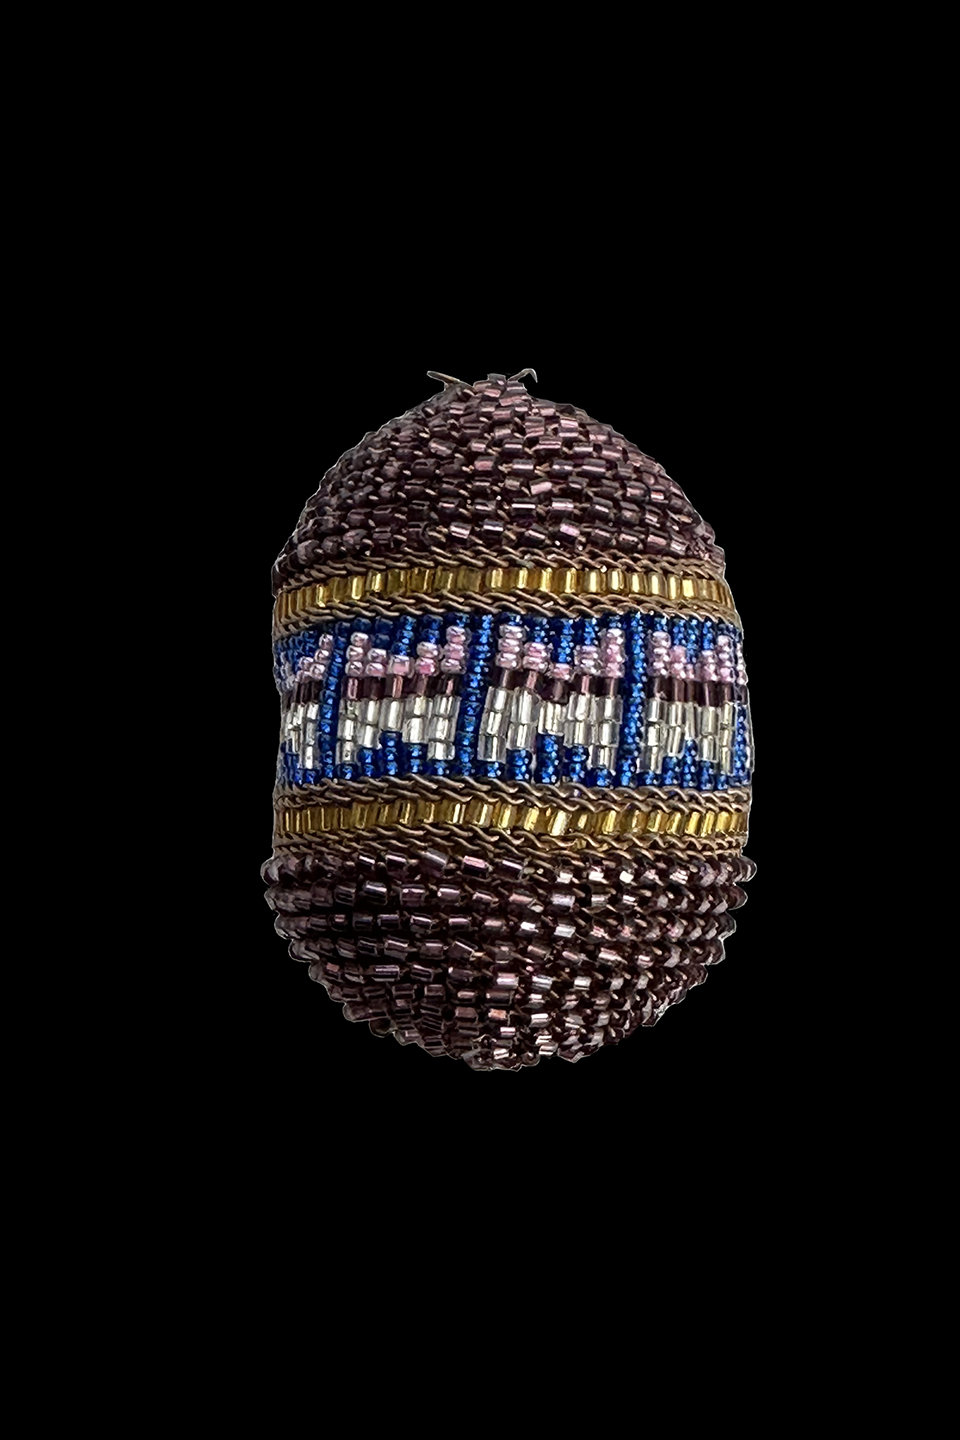 Fully Beaded Egg Shaped Ornament 2 - South Africa